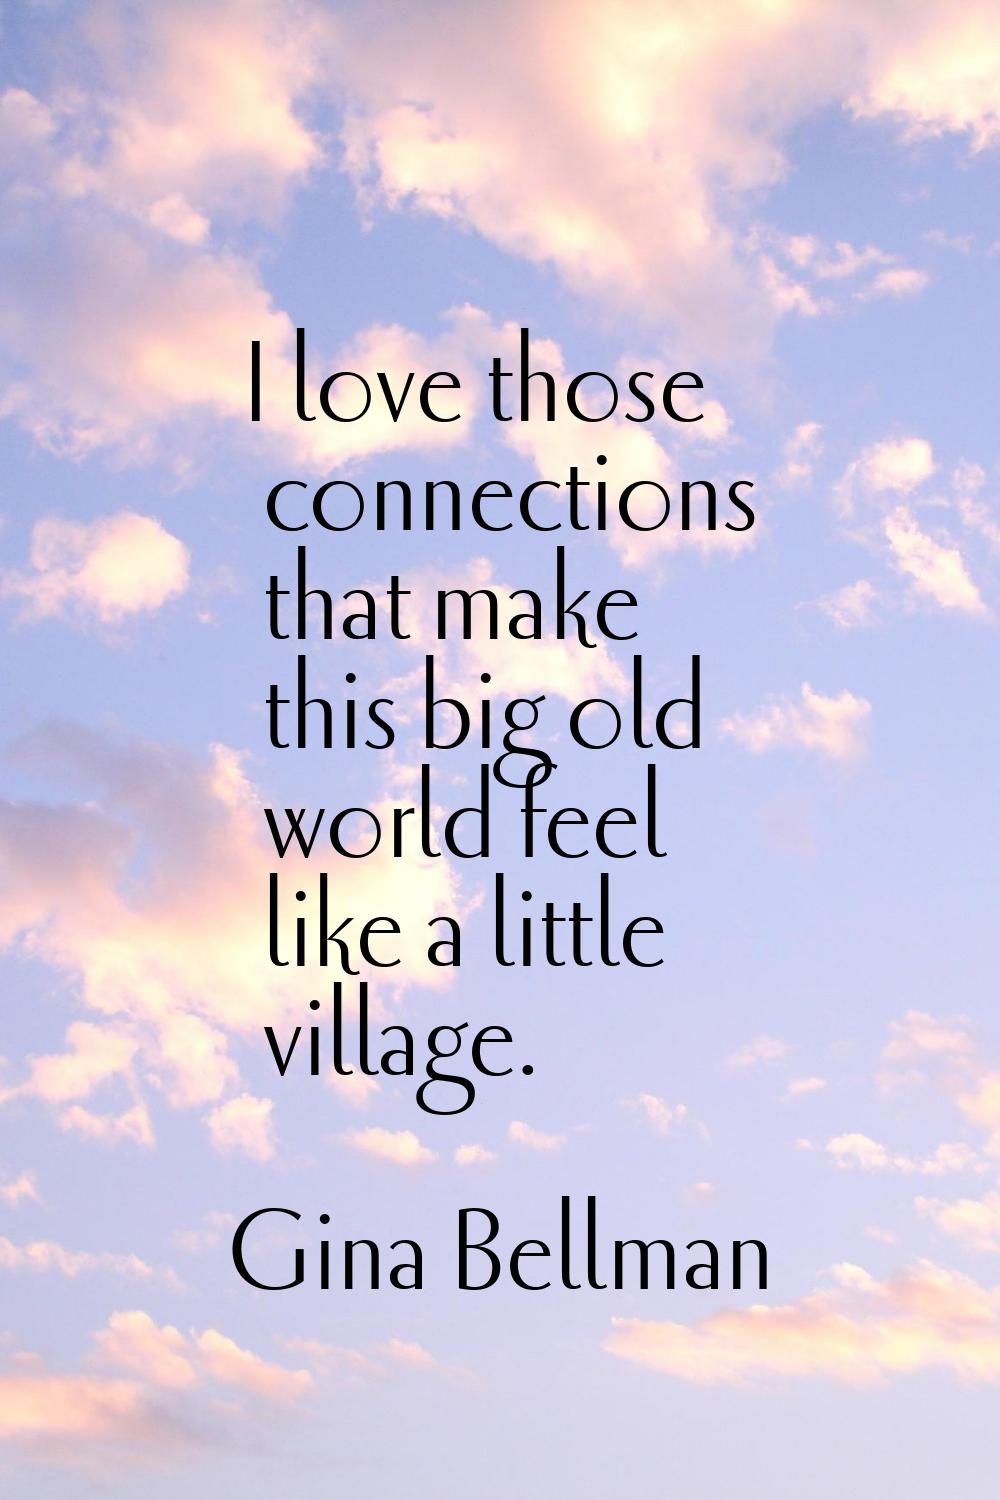 I love those connections that make this big old world feel like a little village.